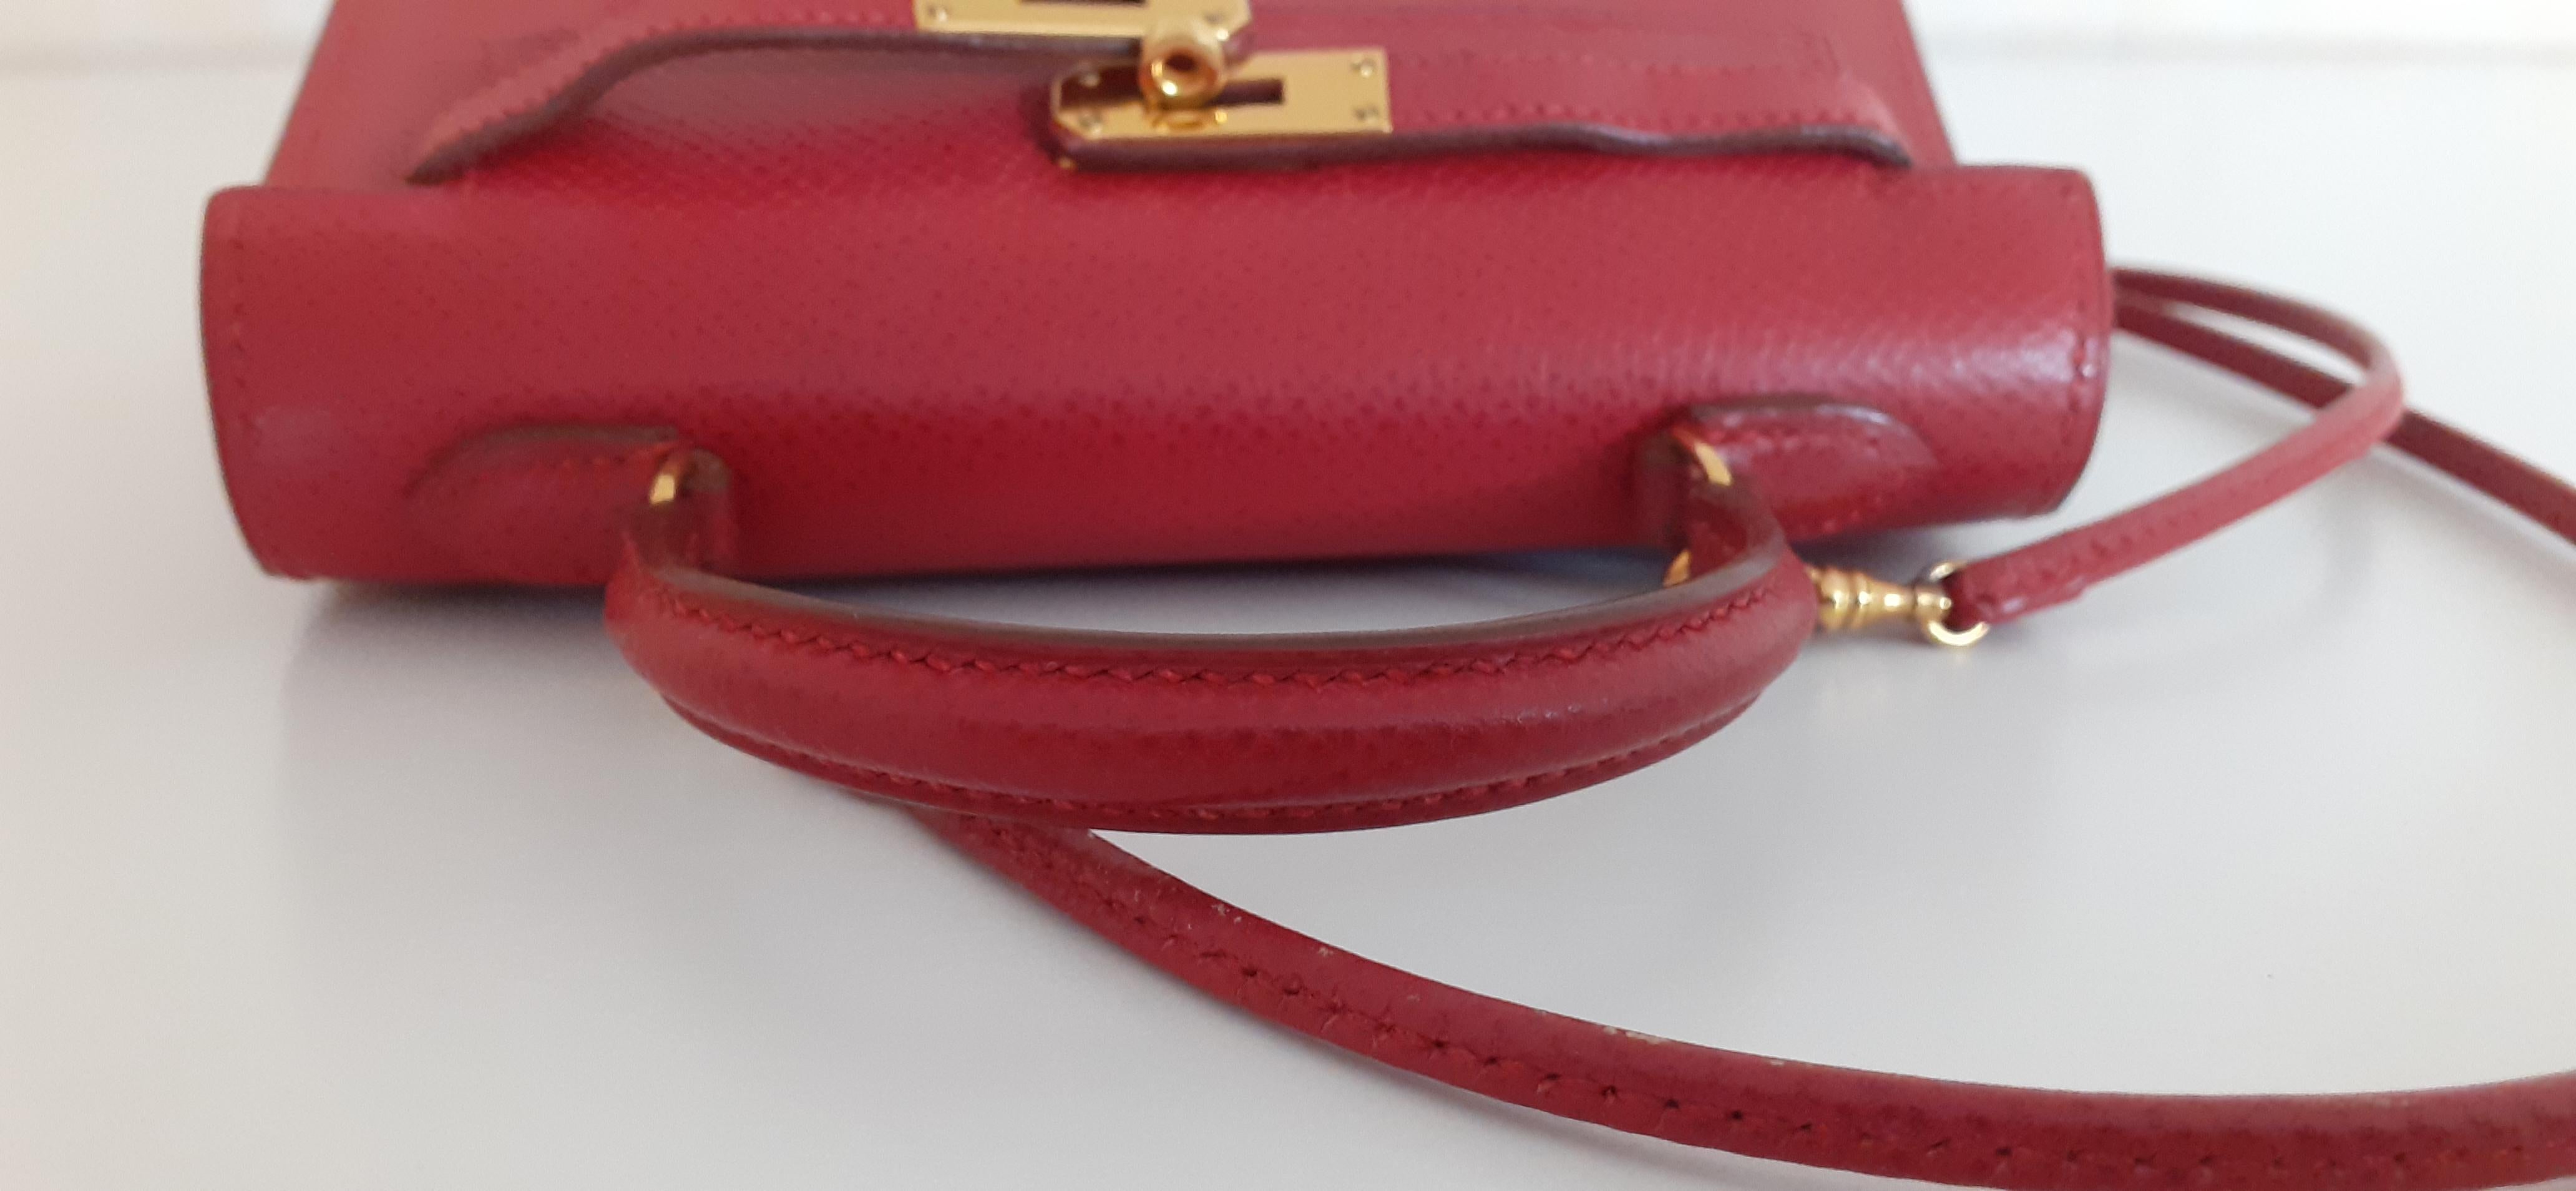 Exceptional Hermès Vintage Micro Kelly 15 cm Sellier Bag Red Leather Gold Hdw For Sale 10